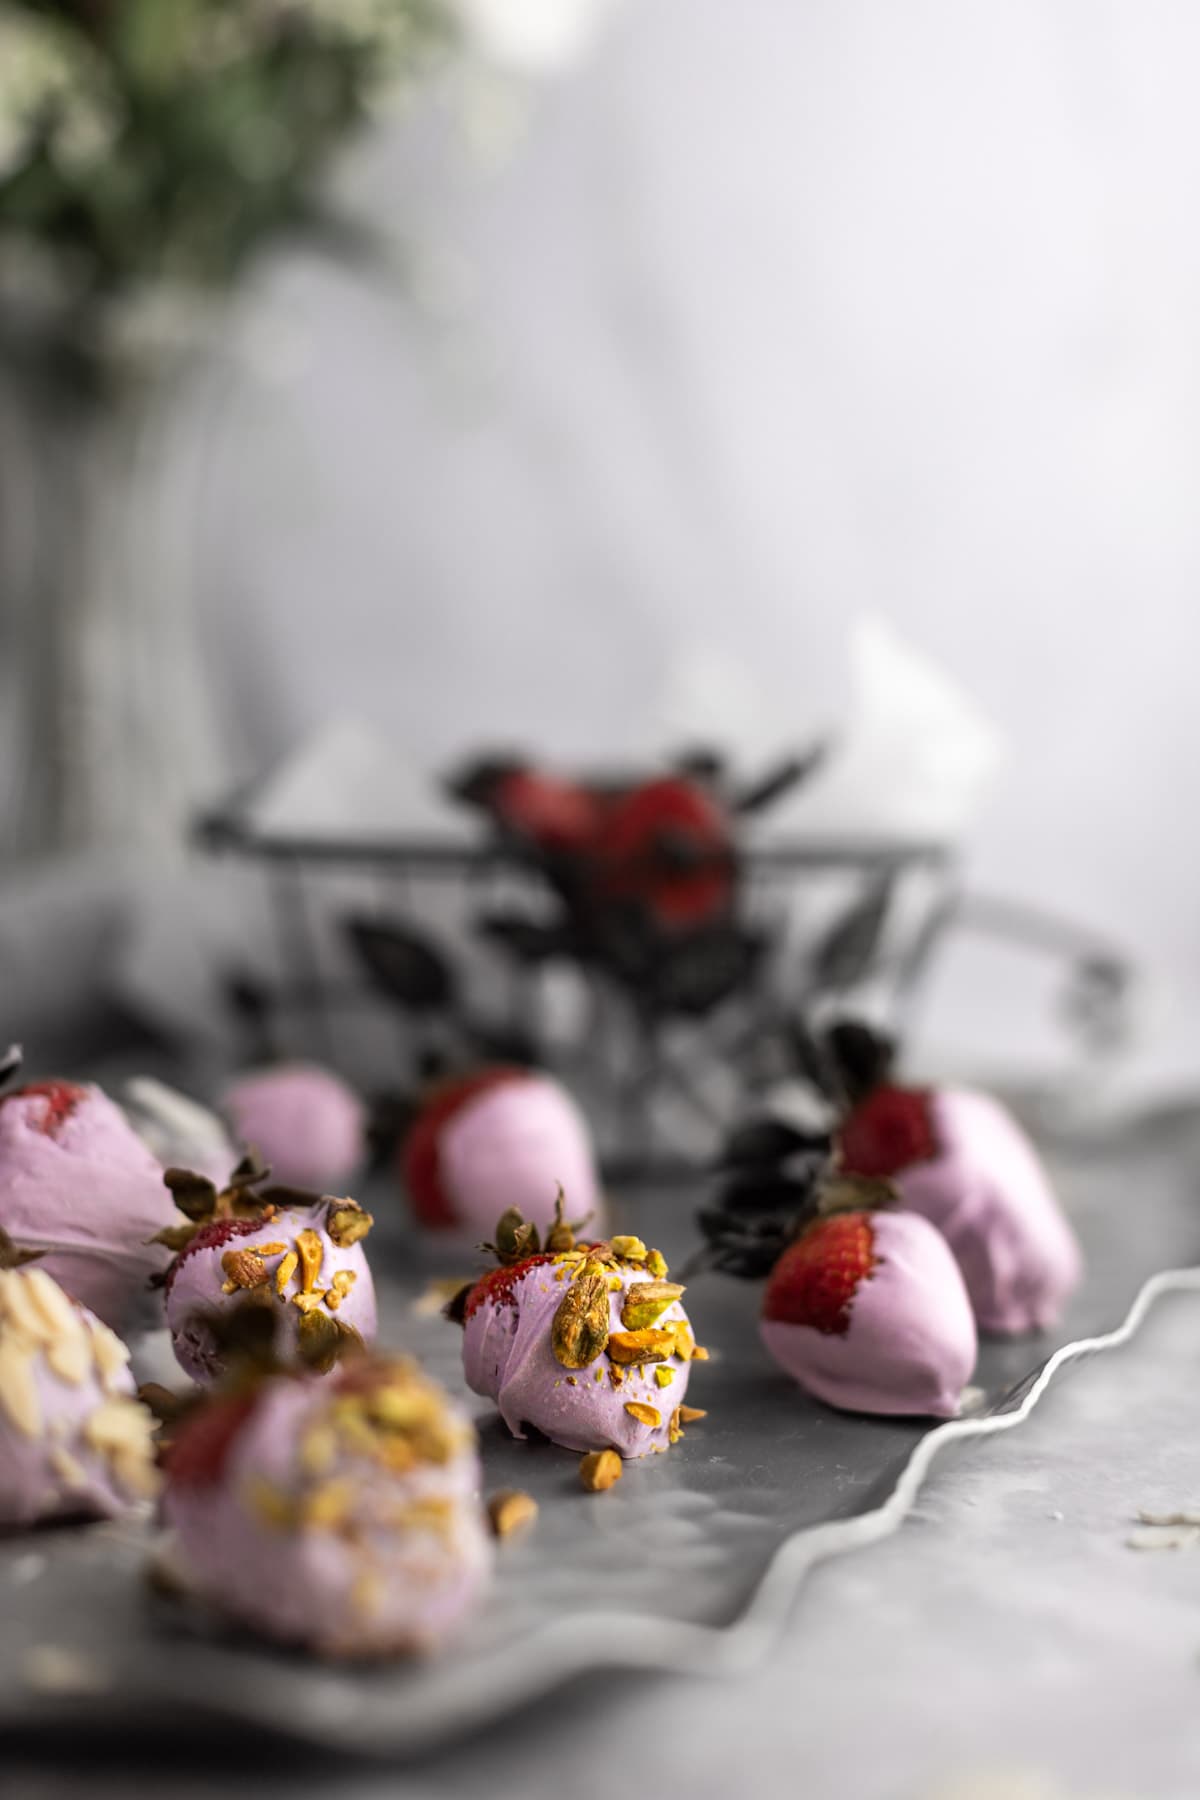 A tray of purple chocolate covers strawberries, topped with crushed pistachios and almonds, with a glass vase of flowers in the background.